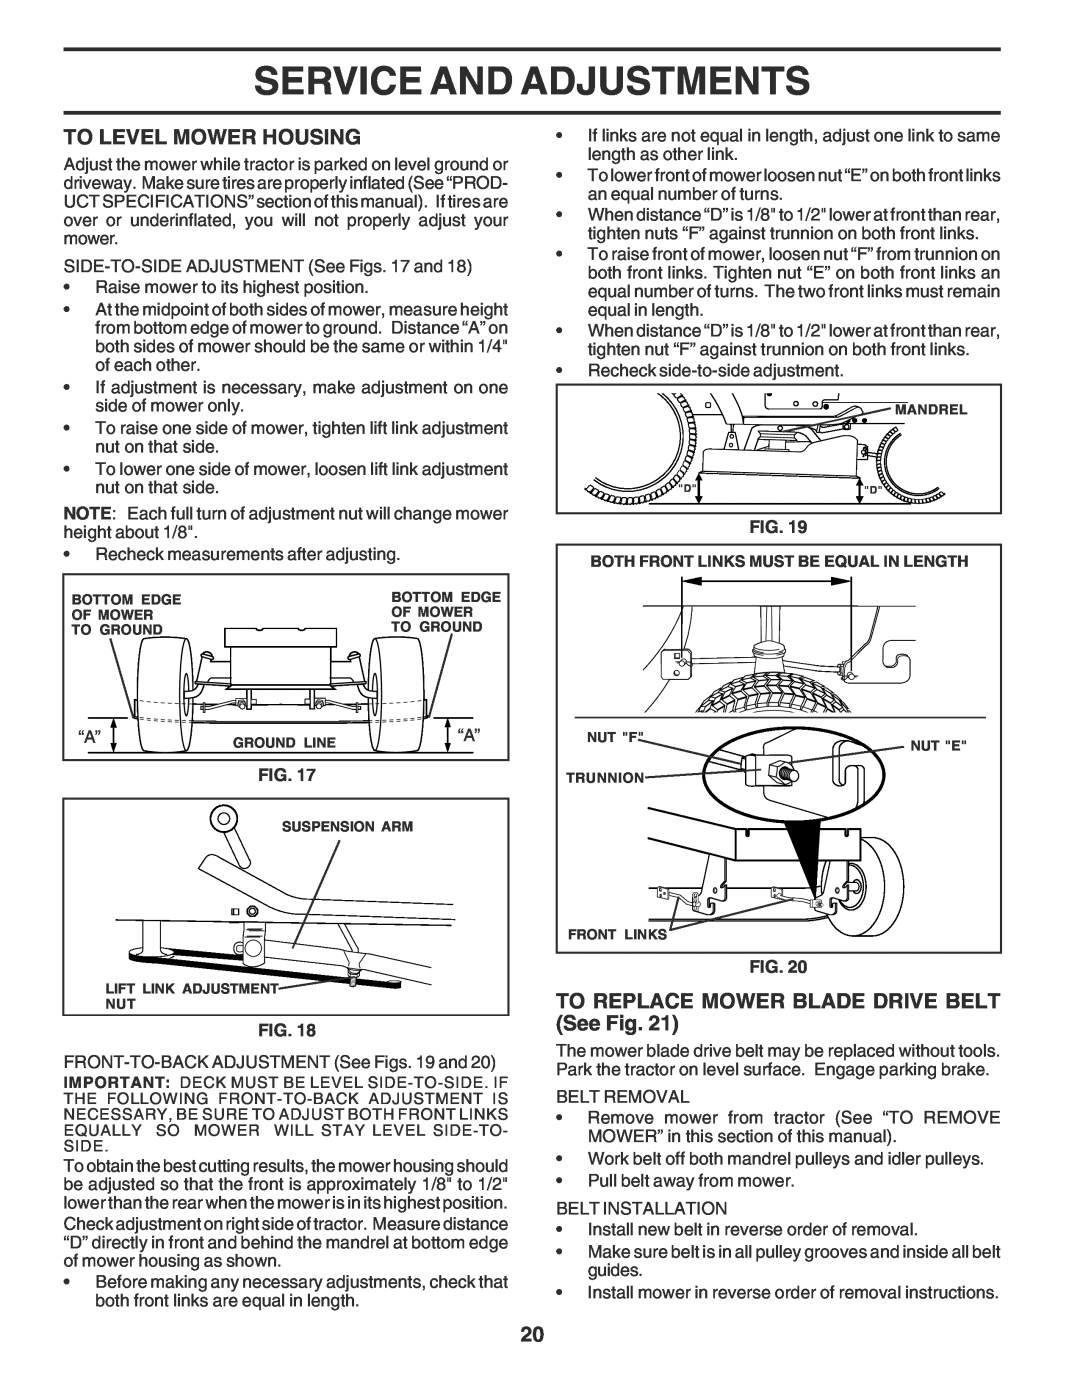 Poulan 183368 owner manual To Level Mower Housing, TO REPLACE MOWER BLADE DRIVE BELT See Fig, Service And Adjustments 